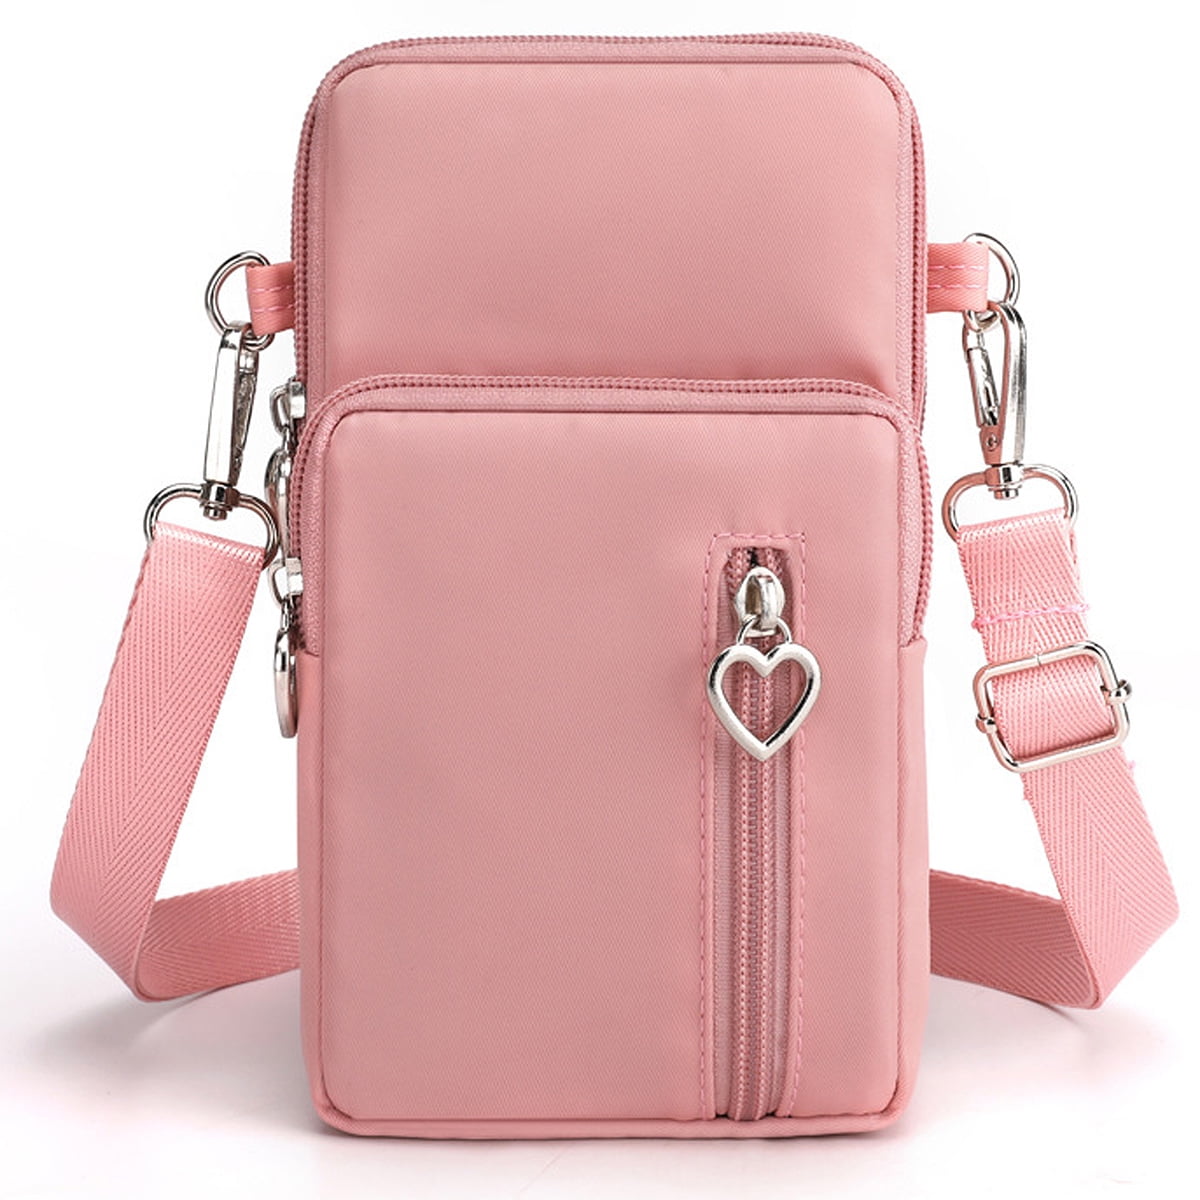 Buy LassZone Women Faux Leather Cross Body Bag Small Phone Wallet Purse  Shoulder Bags with Adjustable Strap for Ladies Girls, Pink With Chain, 7.87  x 5.12inch at Amazon.in